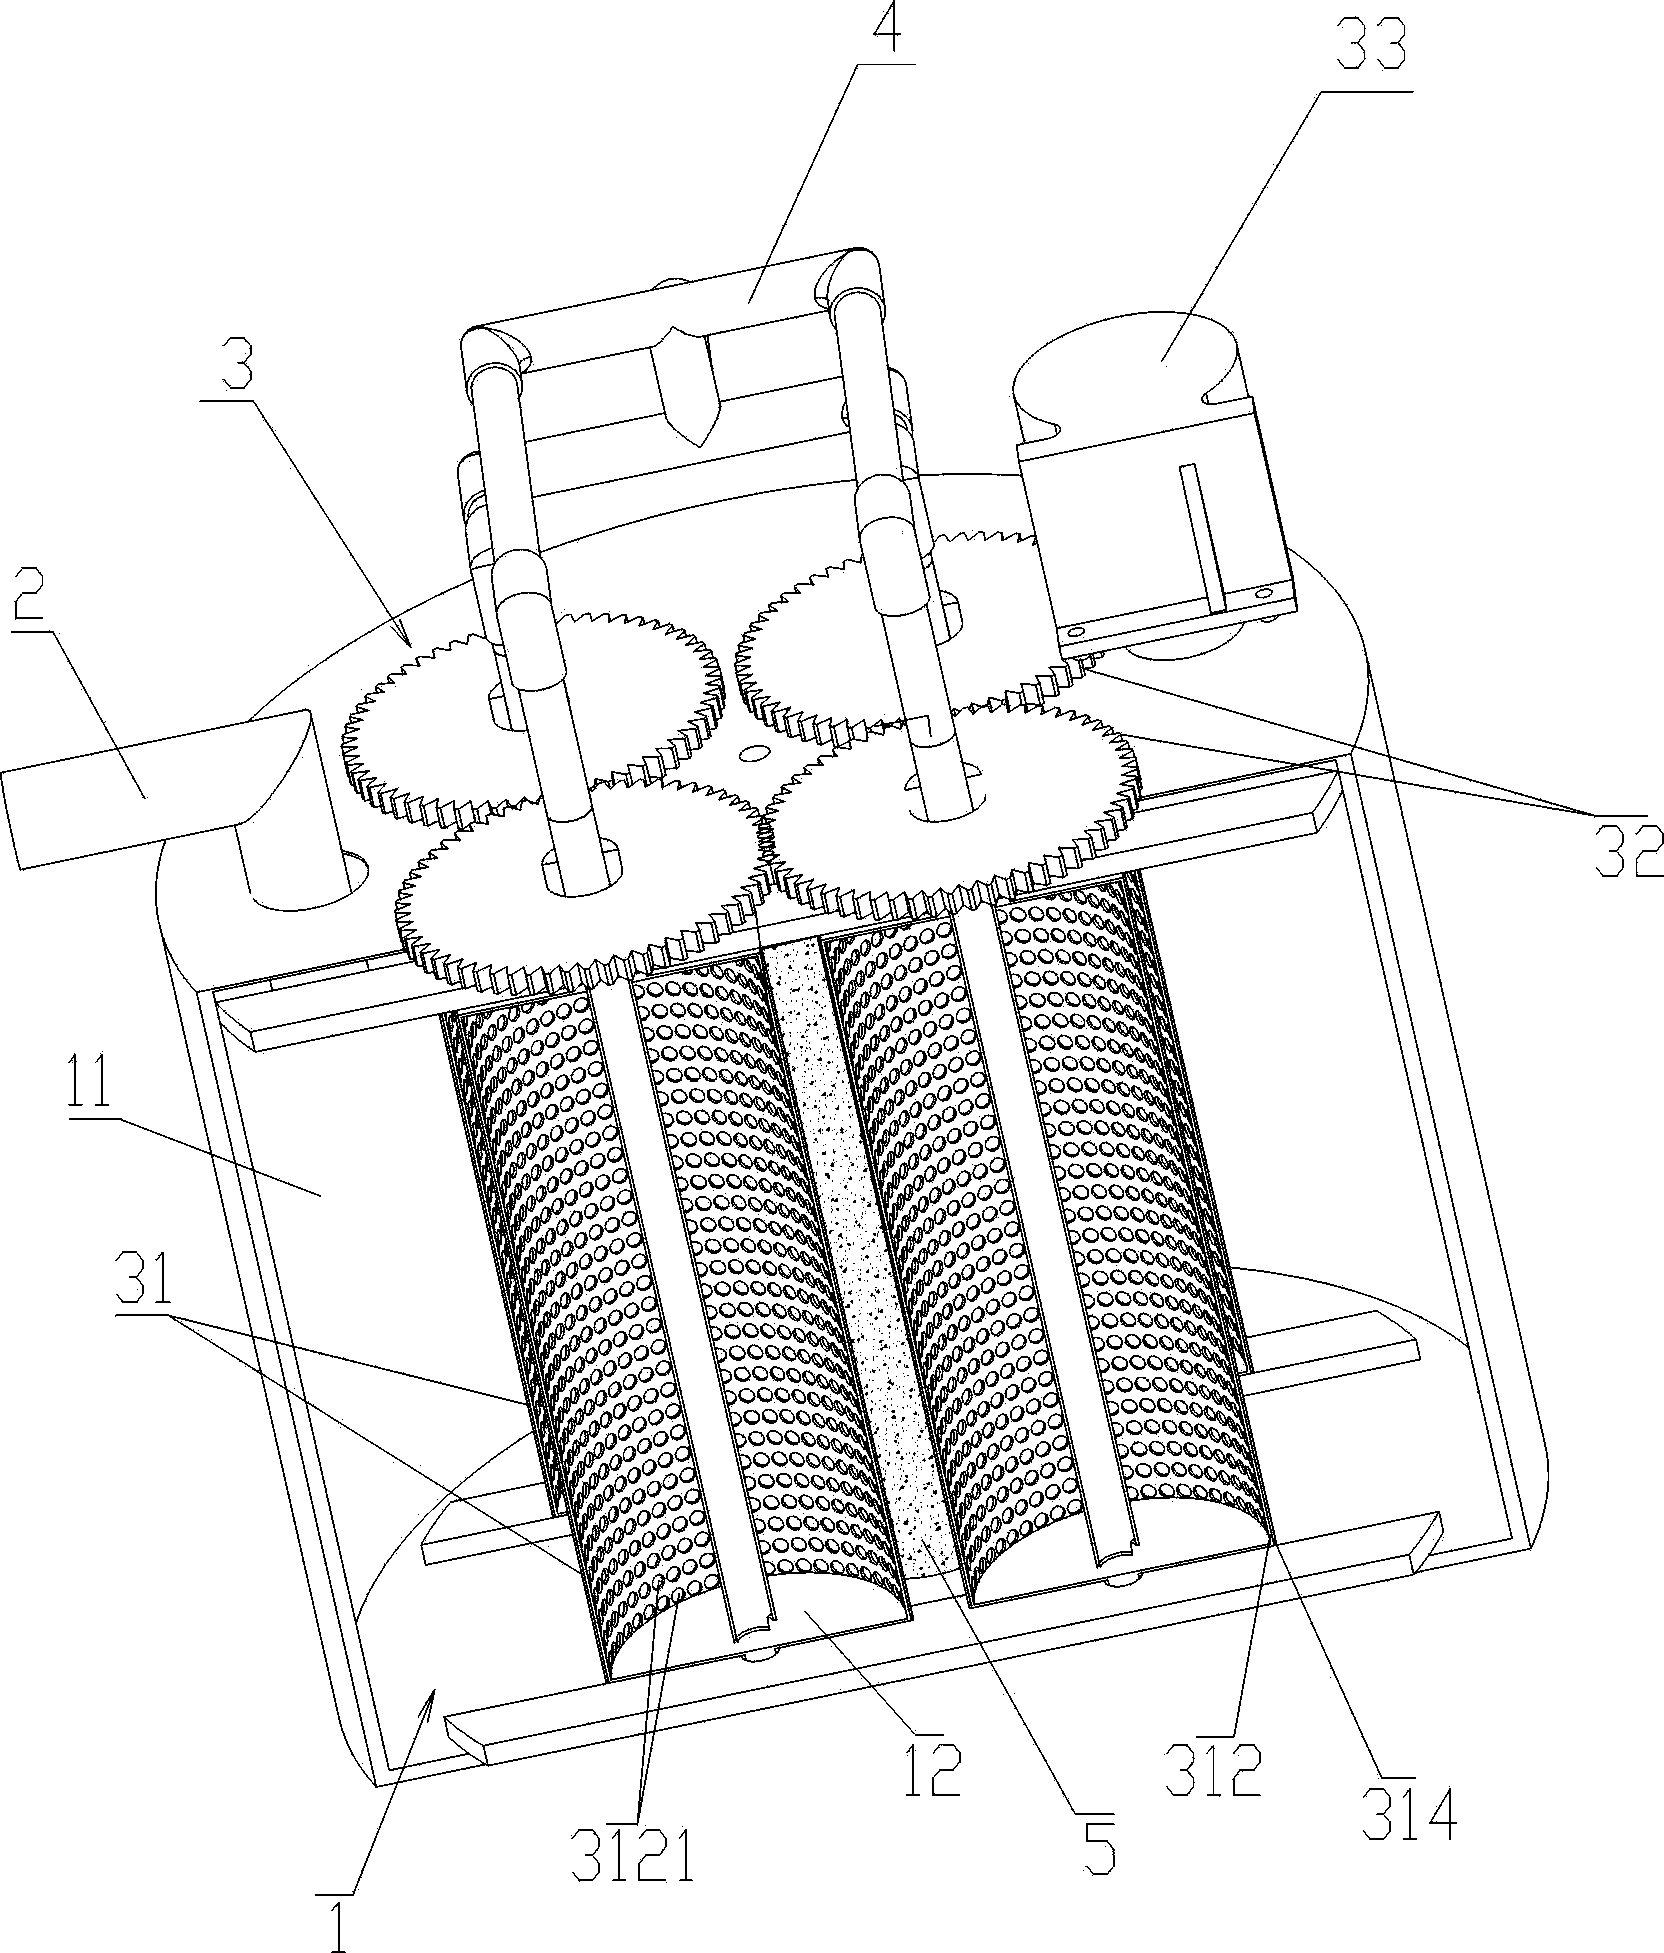 Sewage treatment device and system